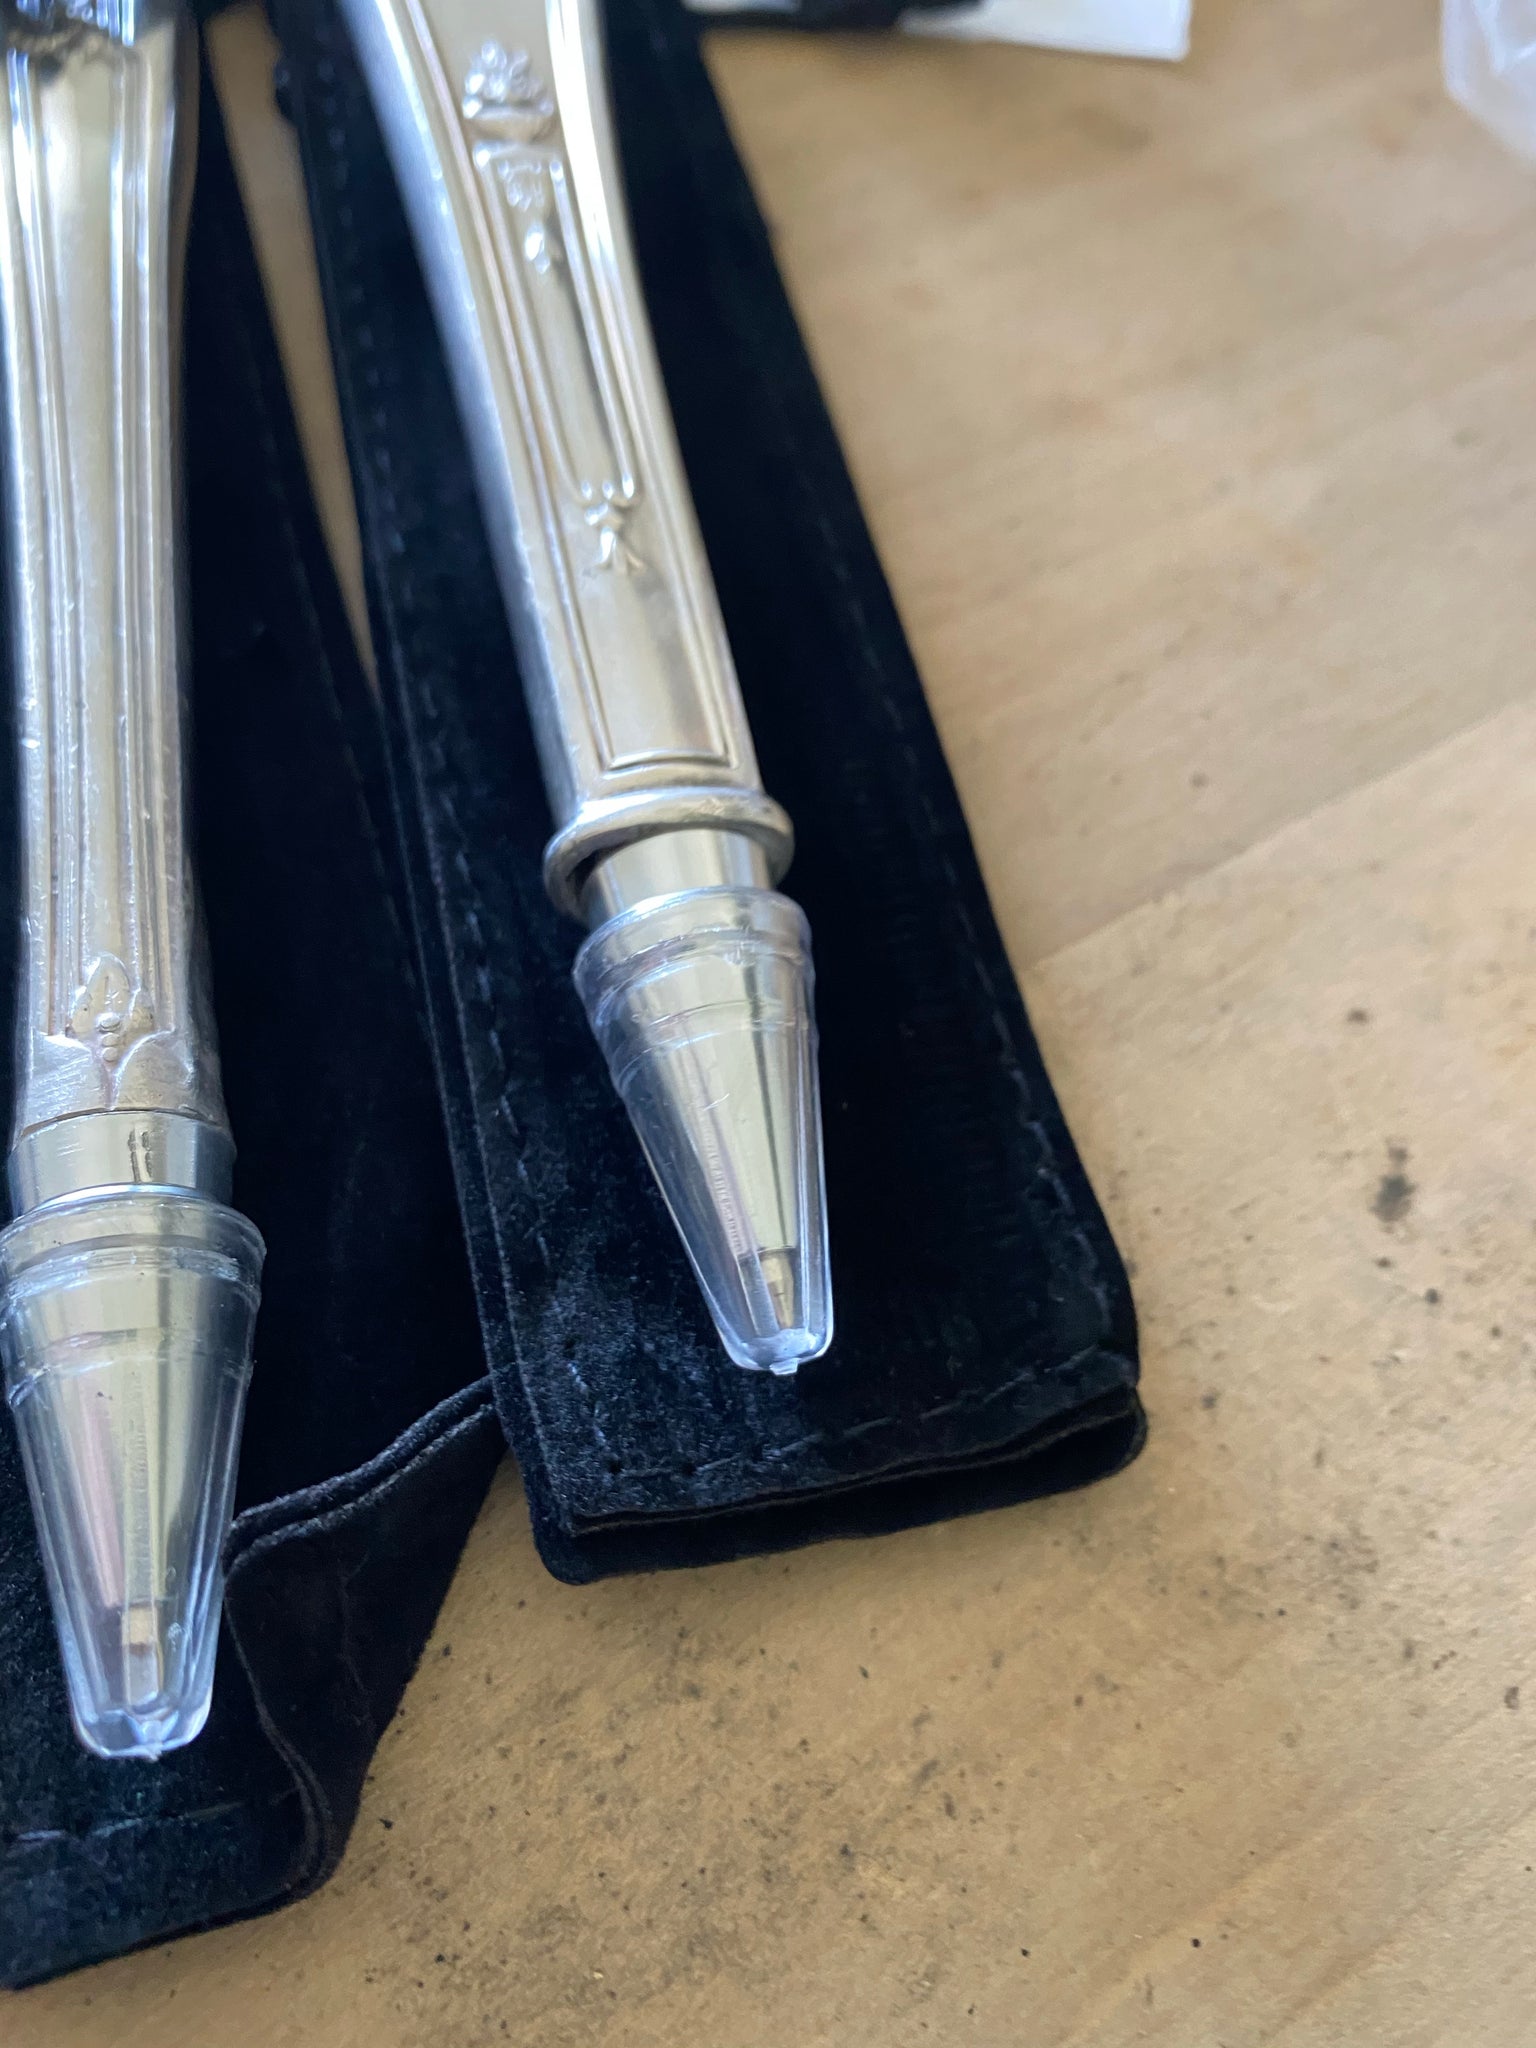 Vintage pens with minor blemishes